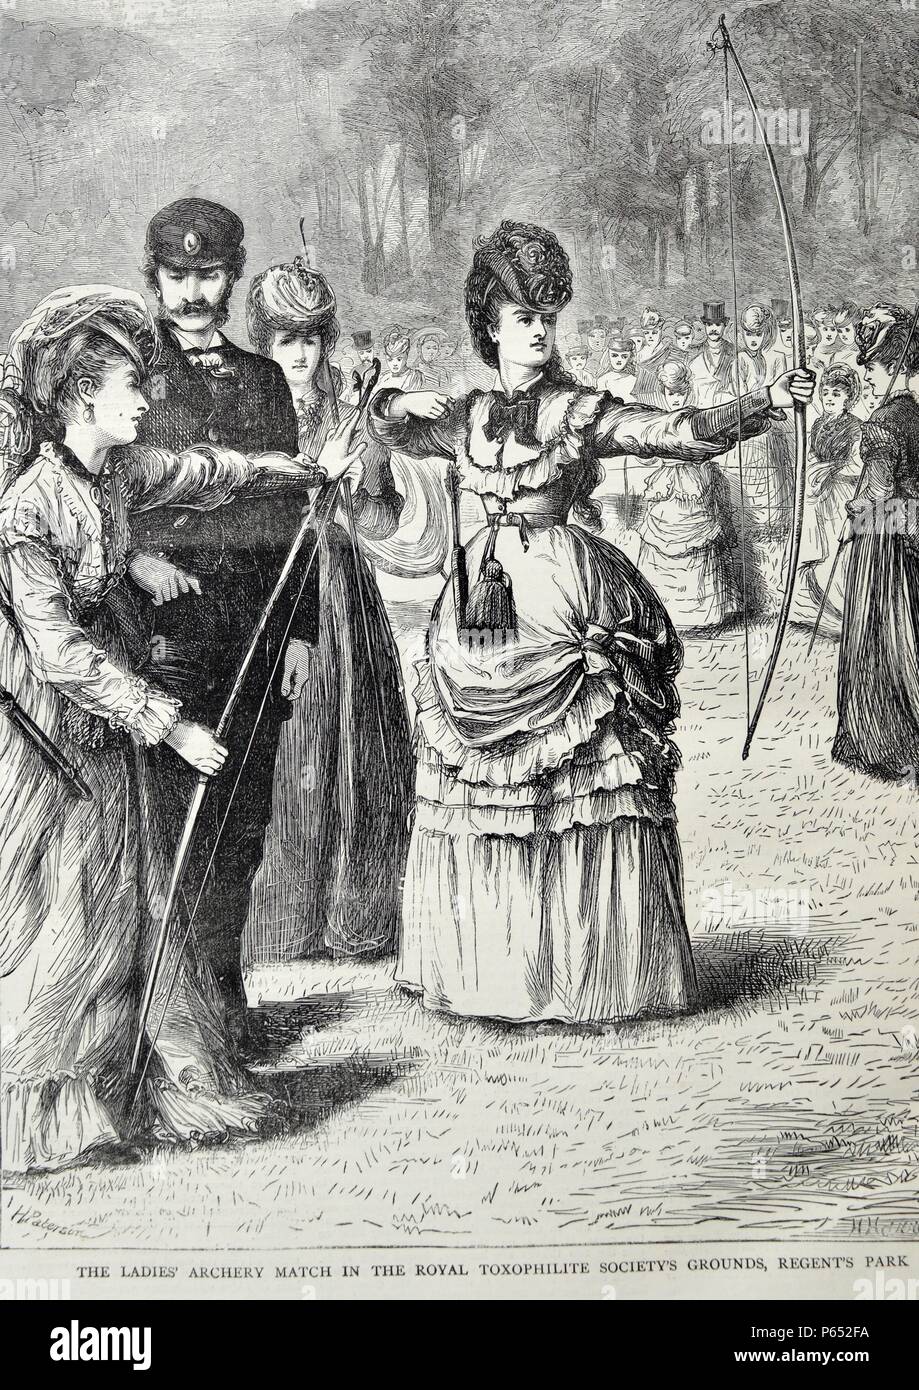 Engraving of the ladies' archery match in the royal toxophilite society's grounds, Regents Park. Dated 1870 Stock Photo